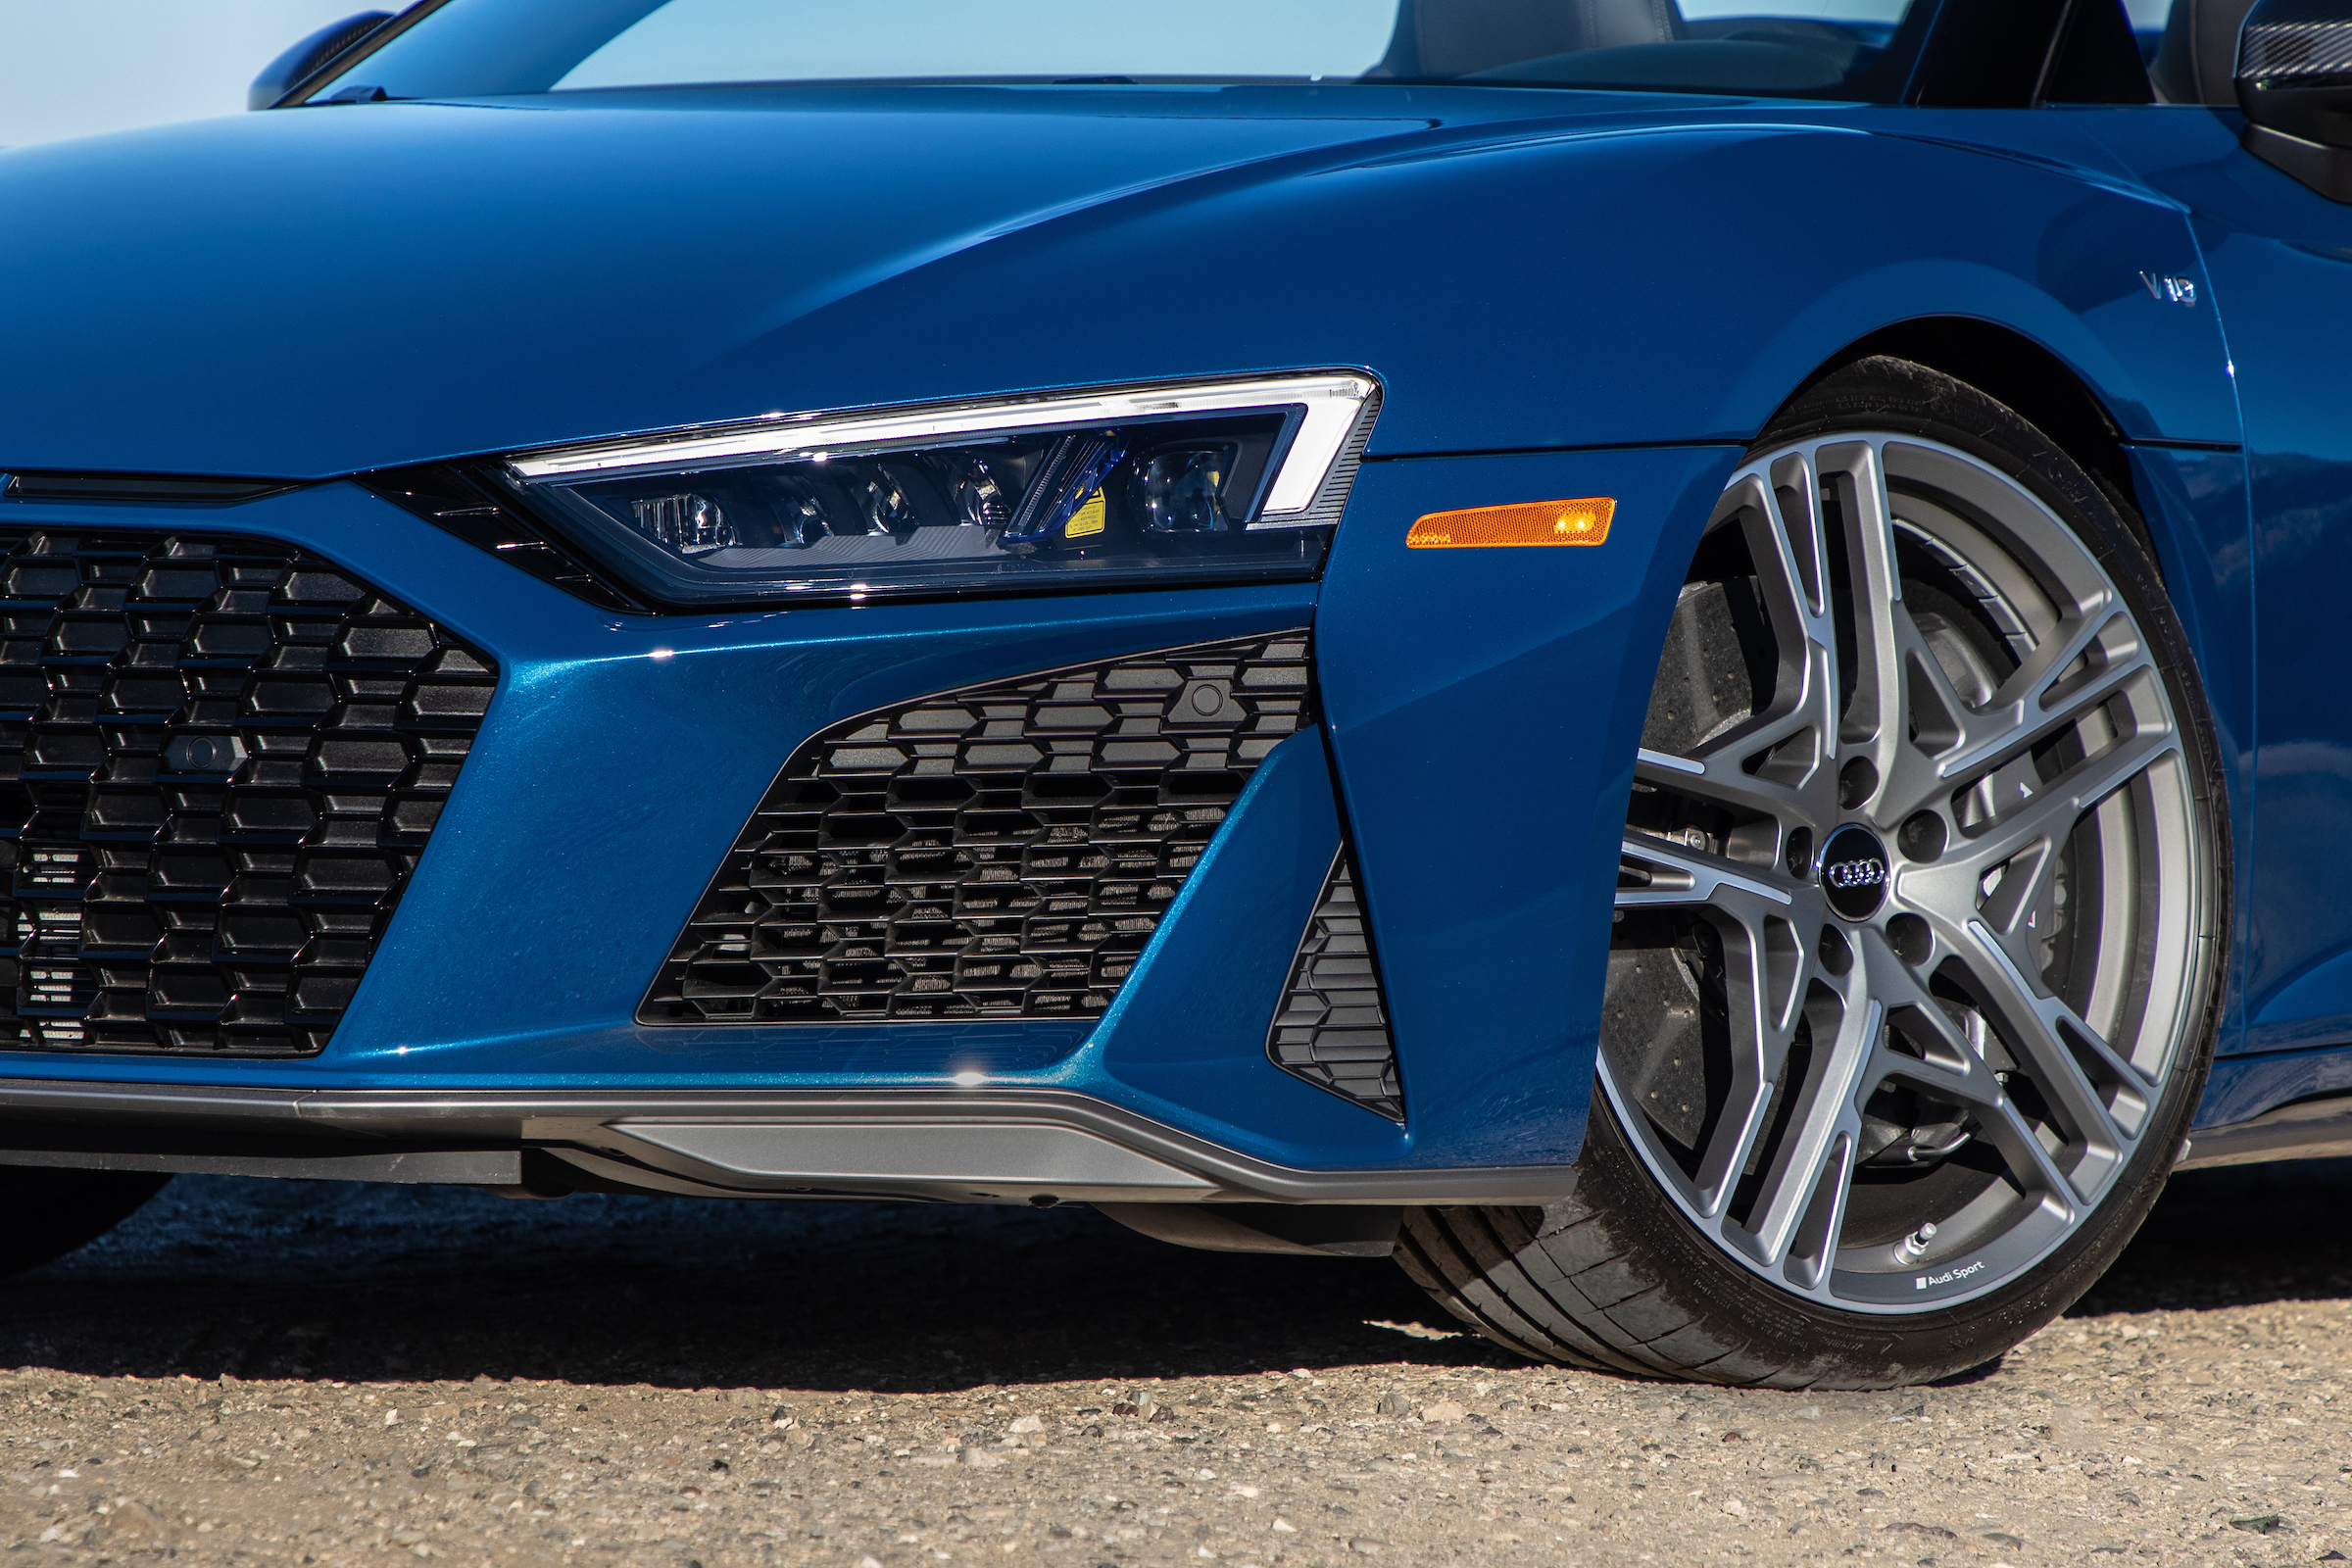 2020 Audi R8 Performance Spyder First Drive: More A3 than Supercar